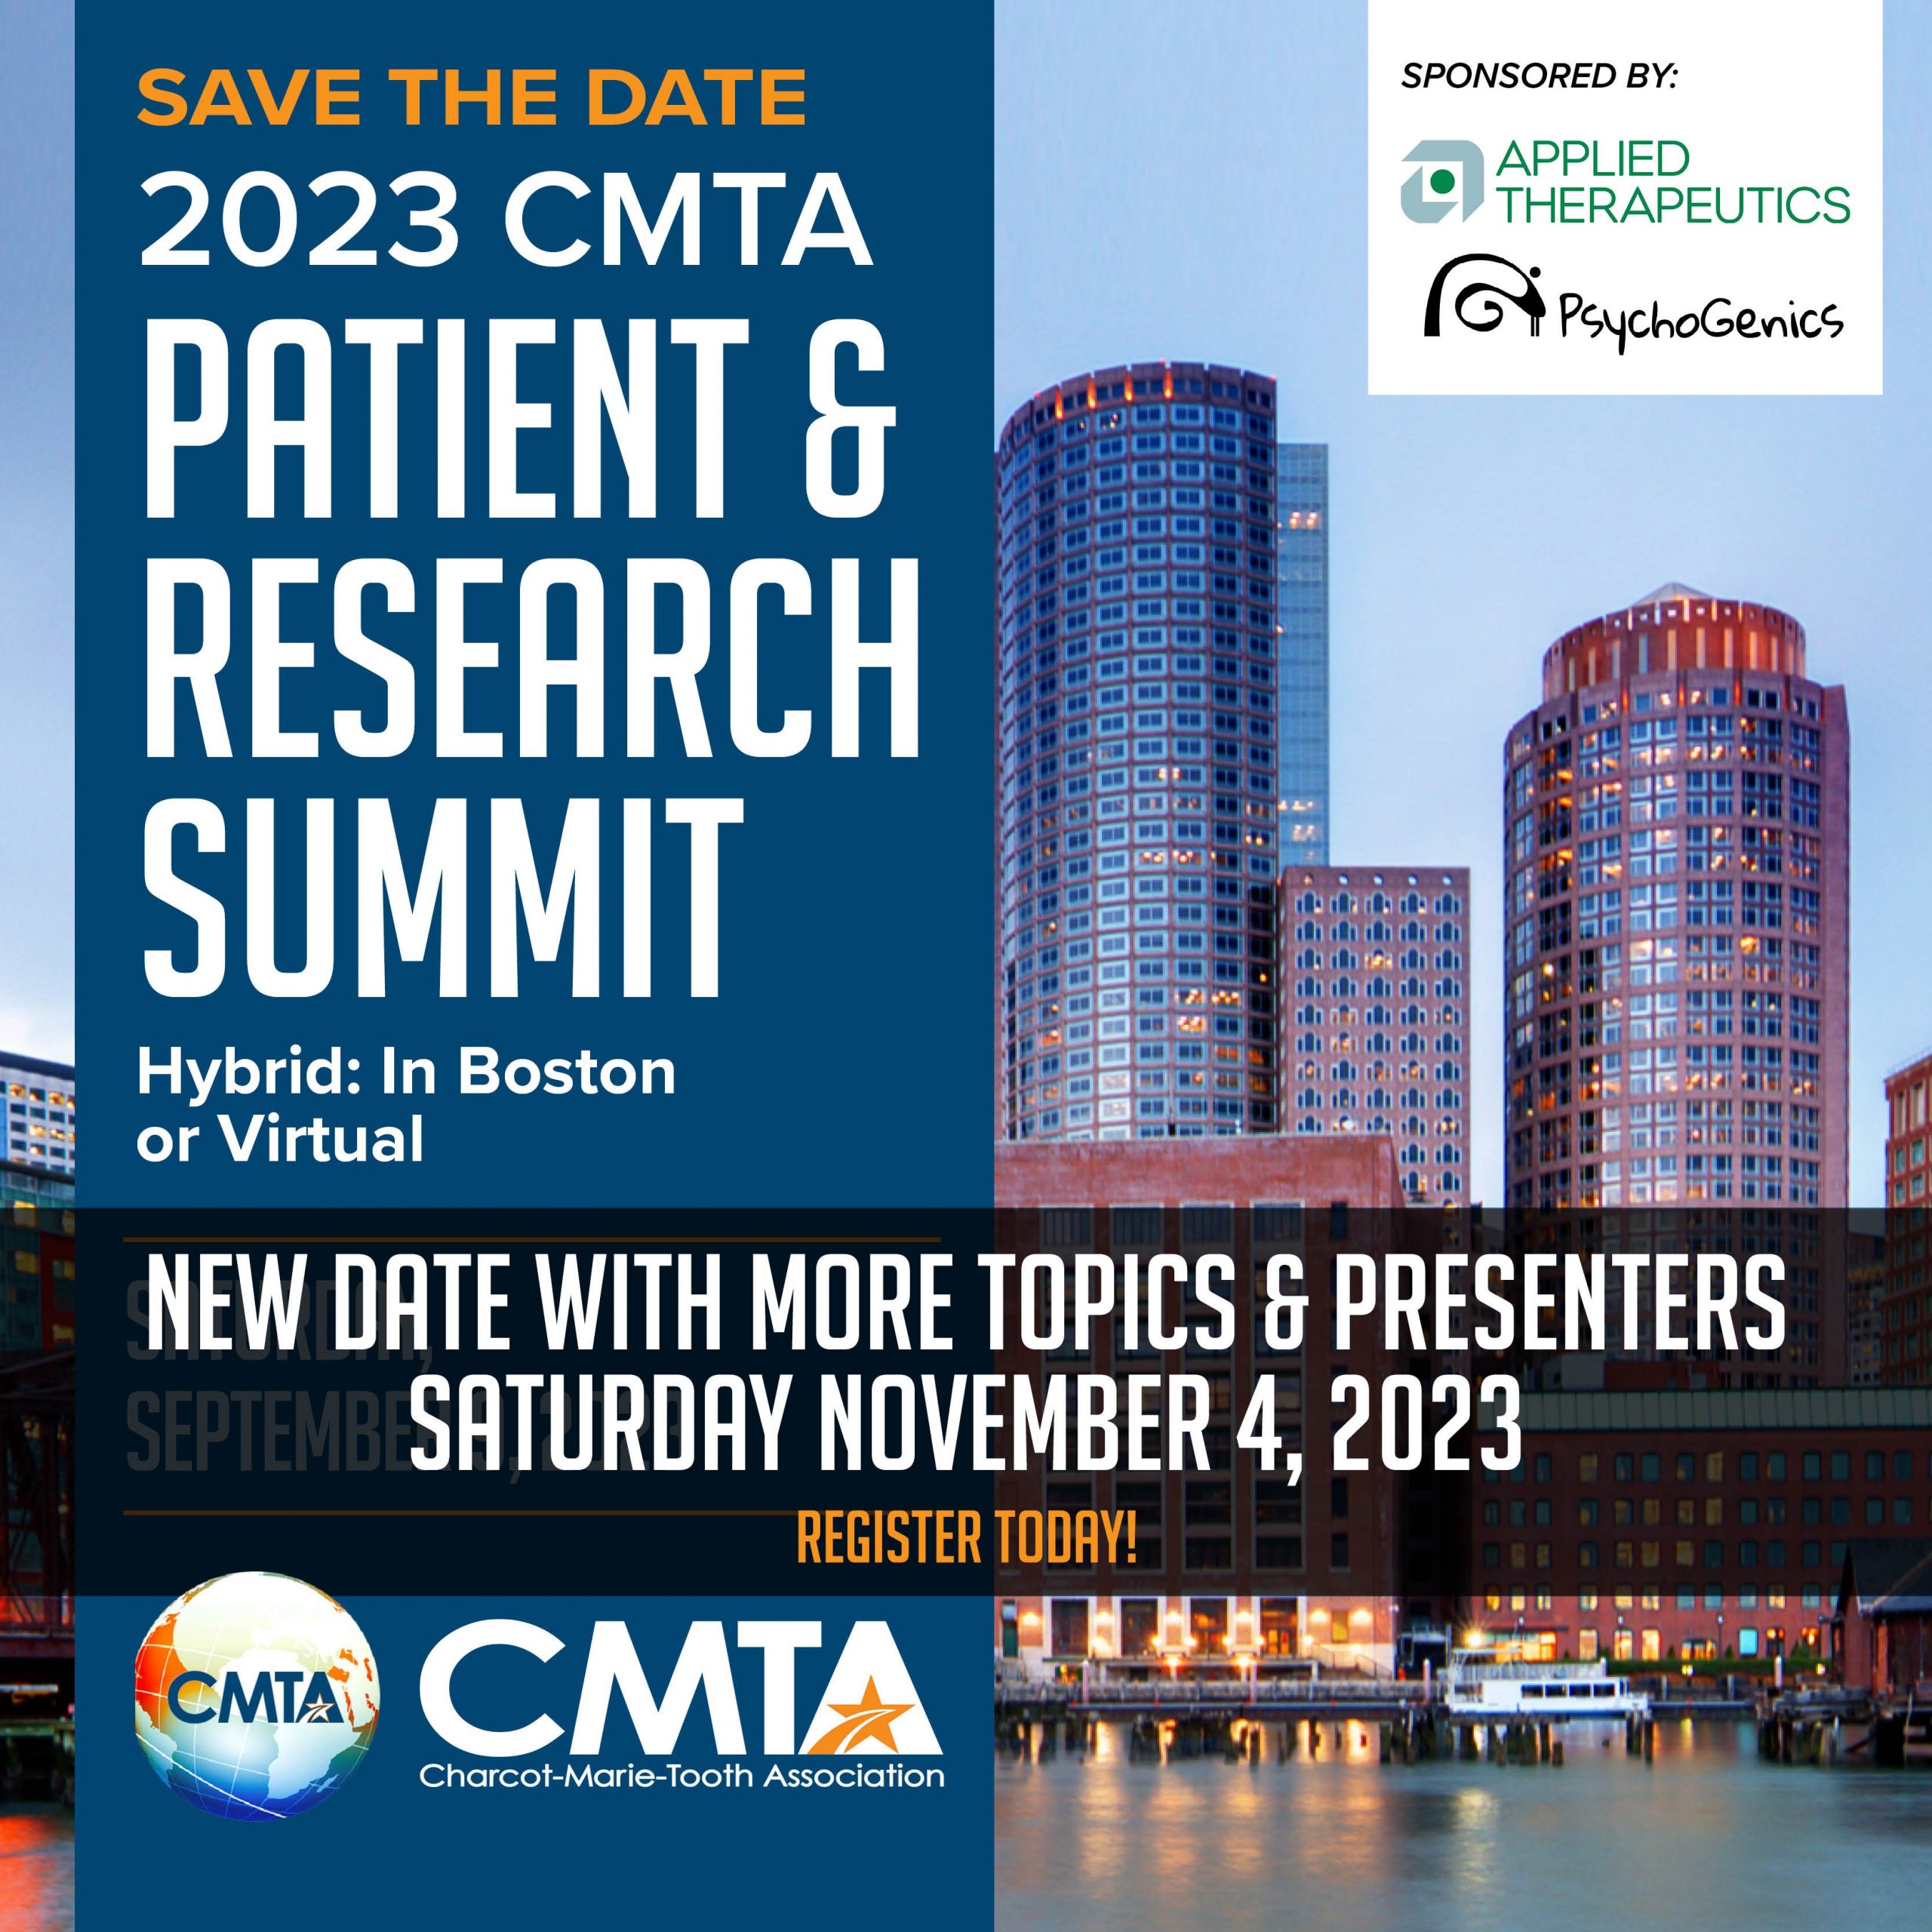 CMTA Patient & Research Summit